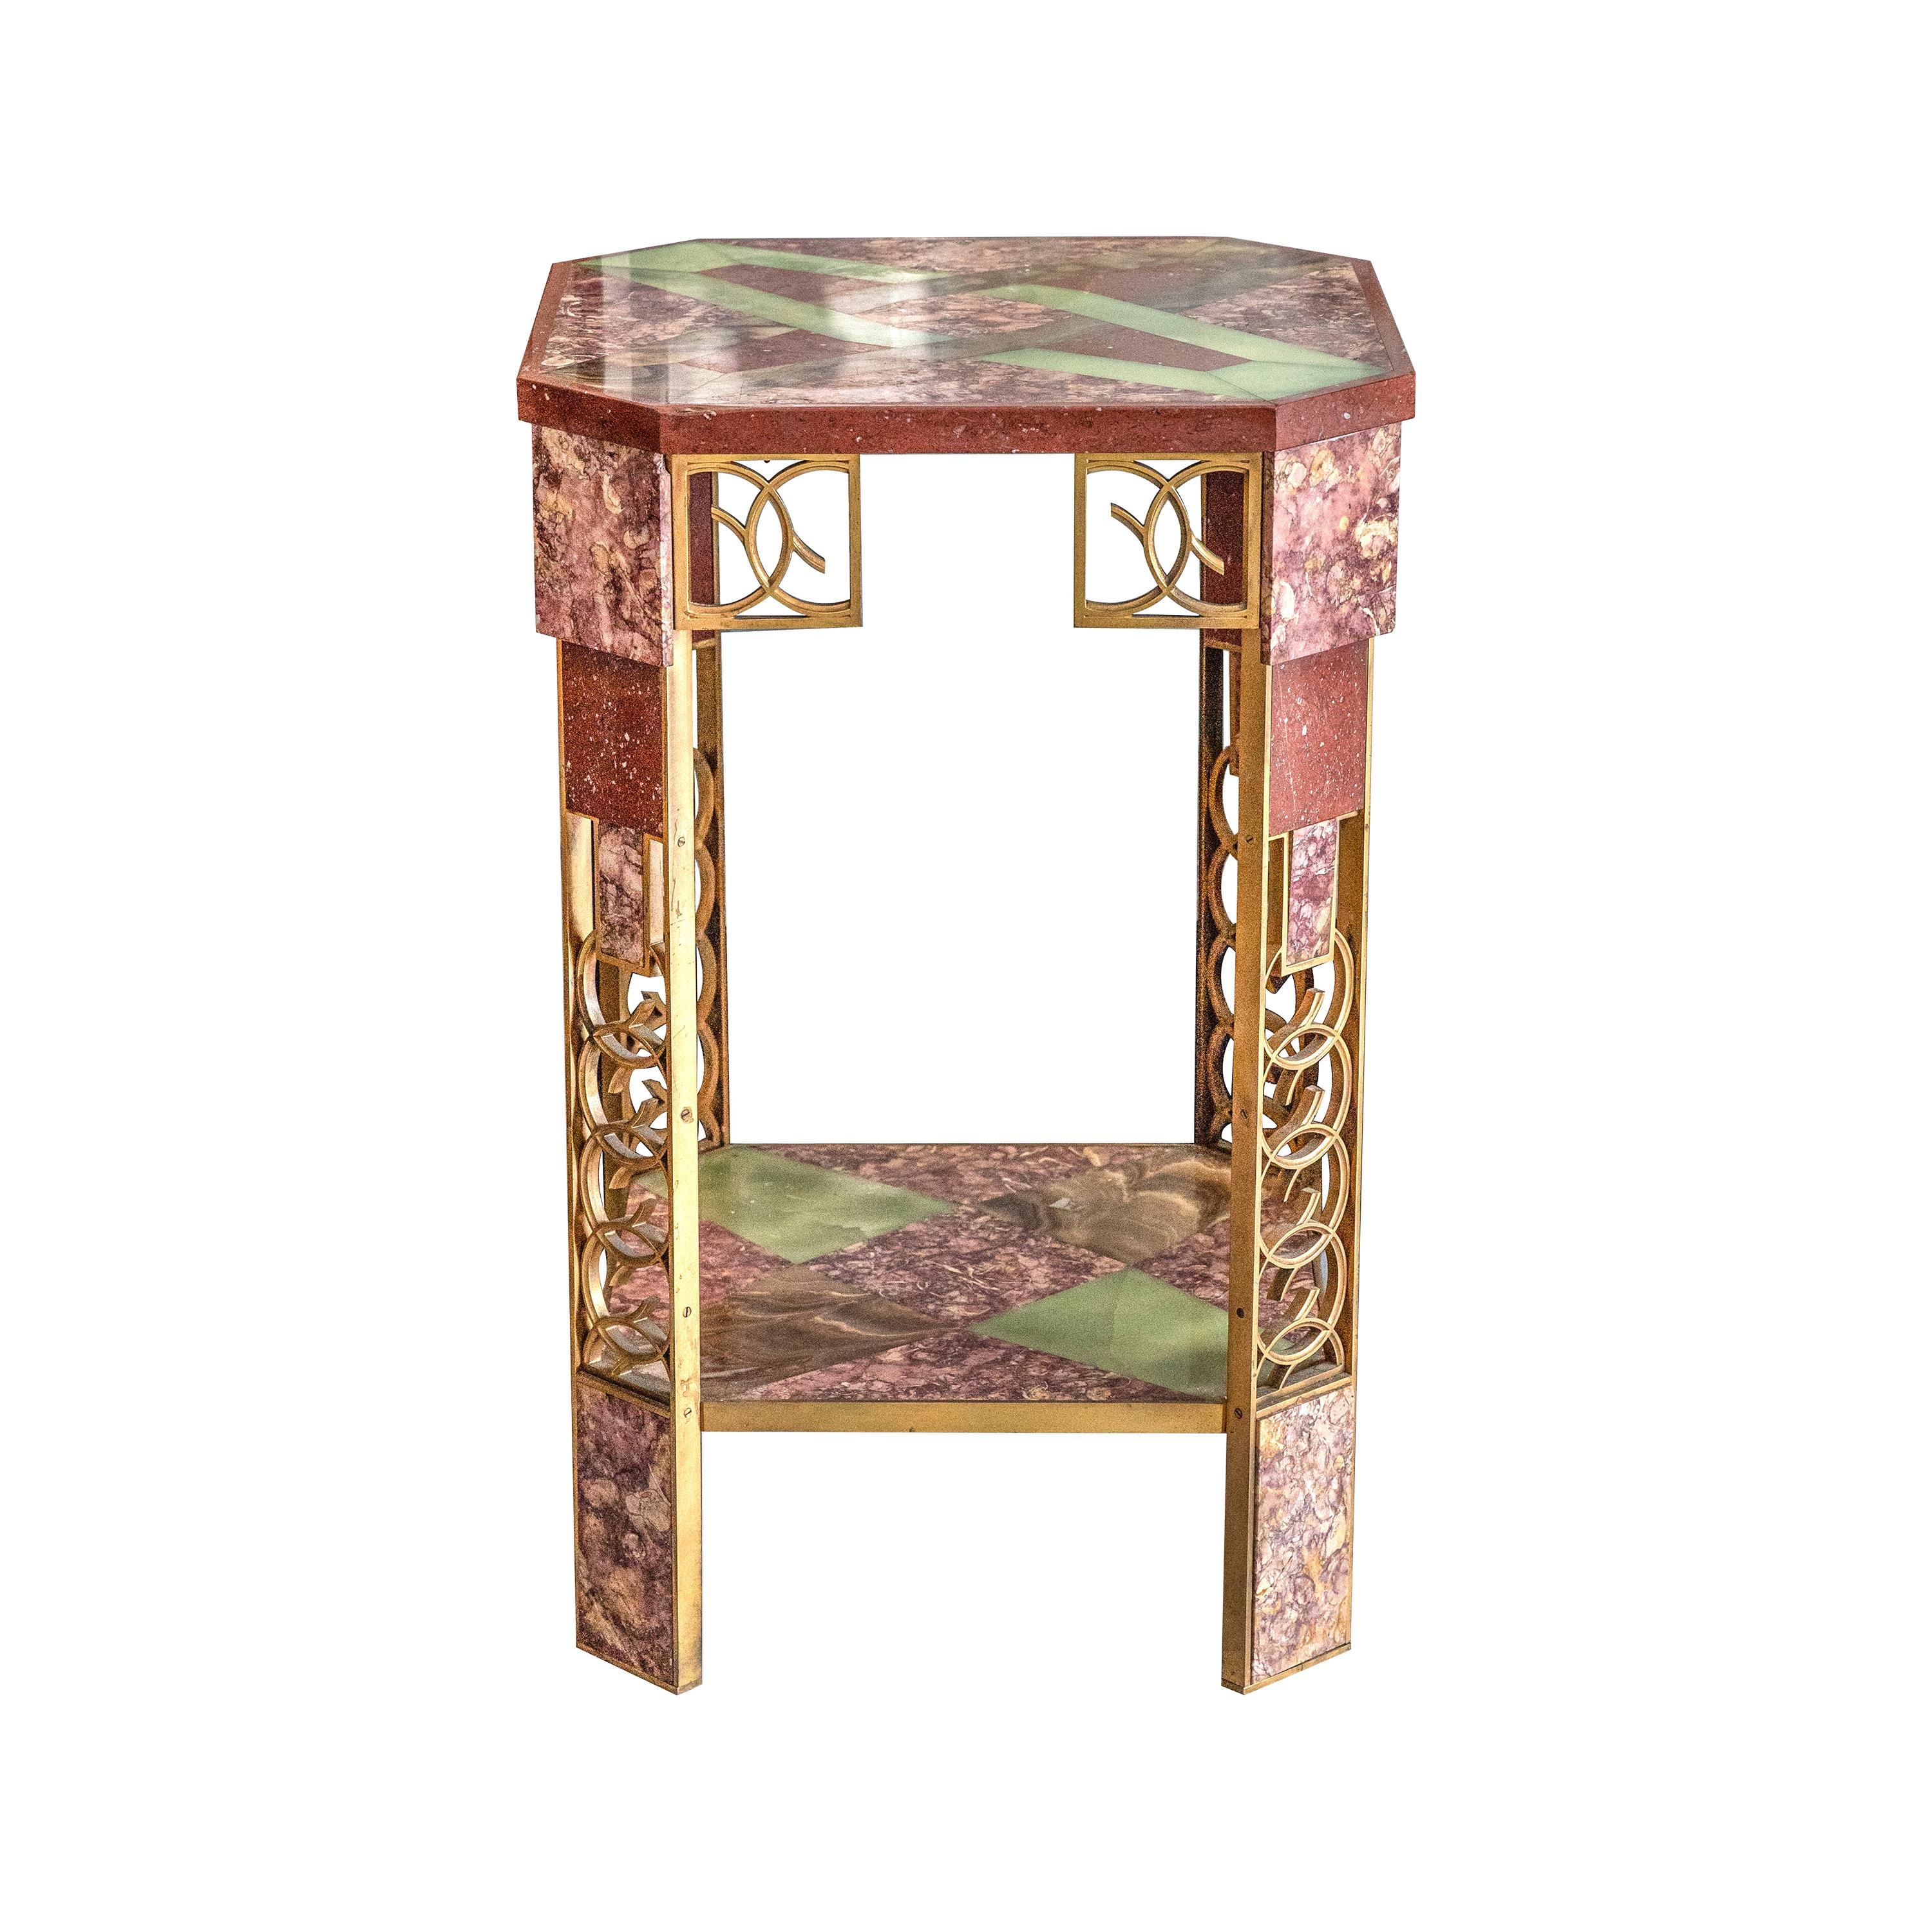 Marble, Onyx, and Gilt-Bronze Side Table, French, circa 1925